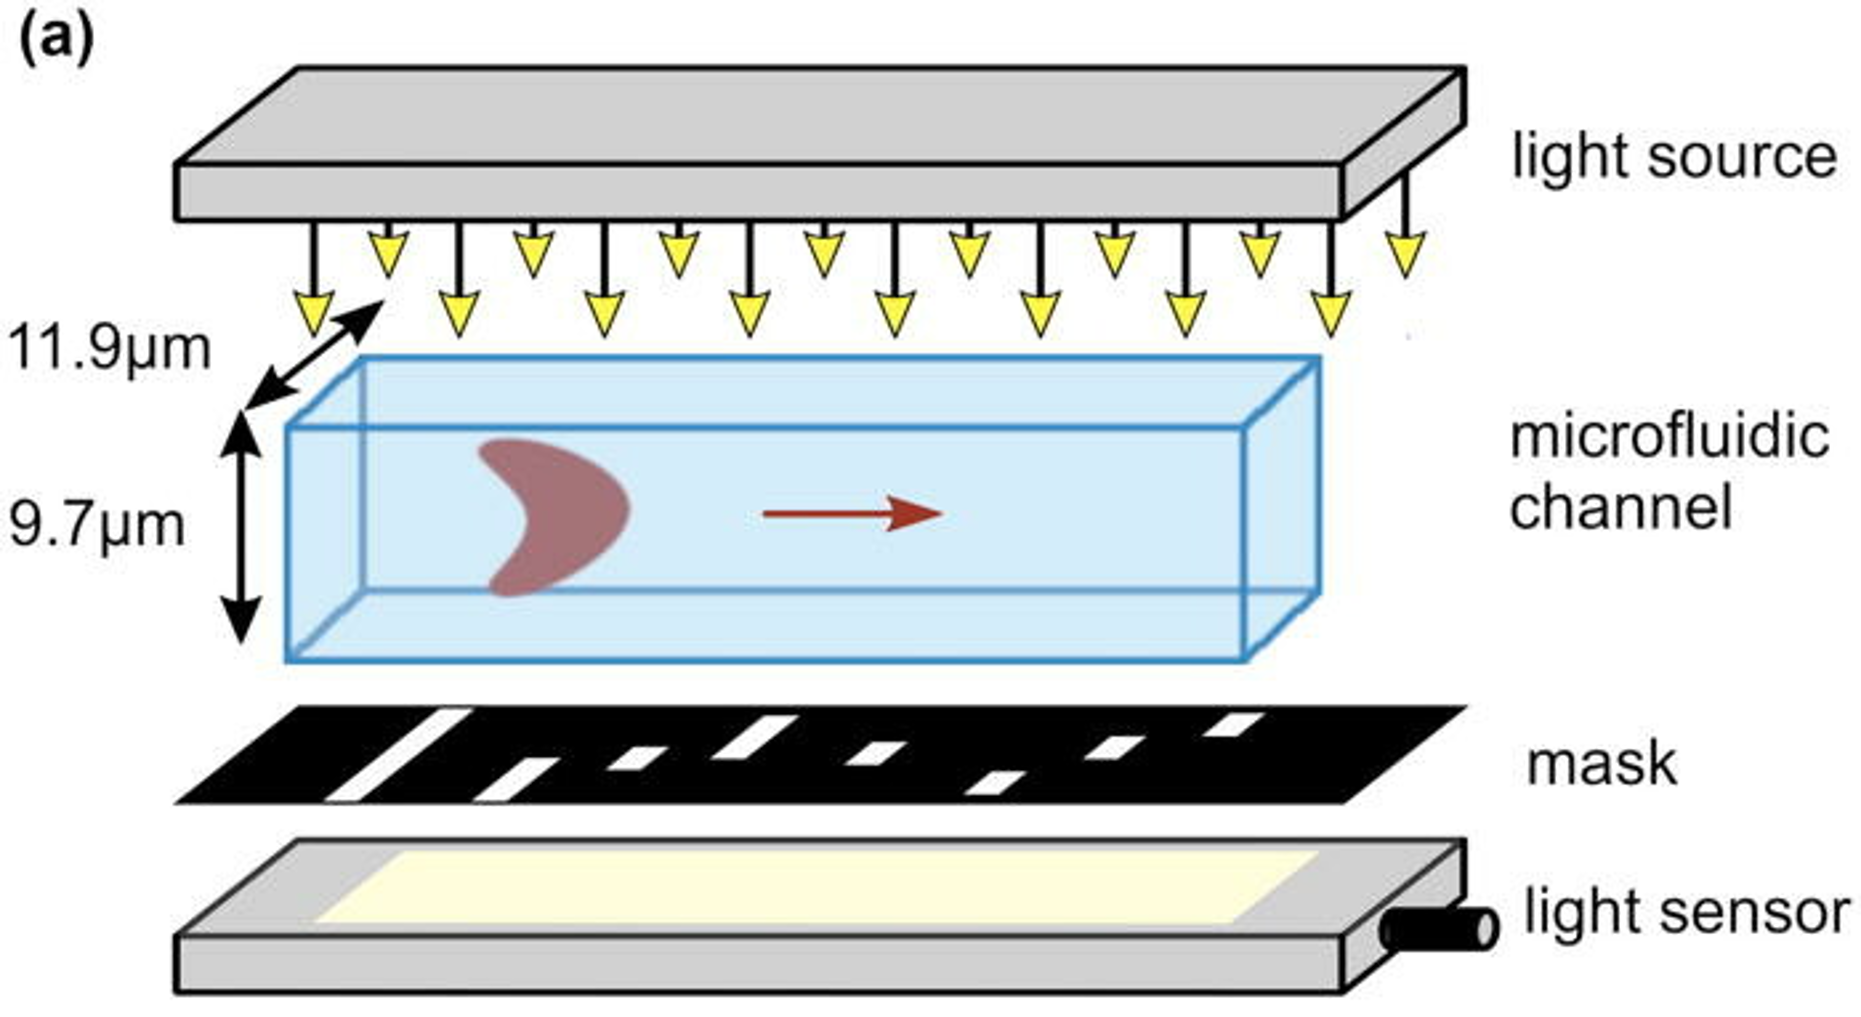 Single cells in a microfluidic channel are passing the optical detection zone. In the simulated setup, the cells are illuminated by a collimated light source and the transmitted light is modulated by a binary amplitude mask that is placed in between the channel and a simple light sensor.